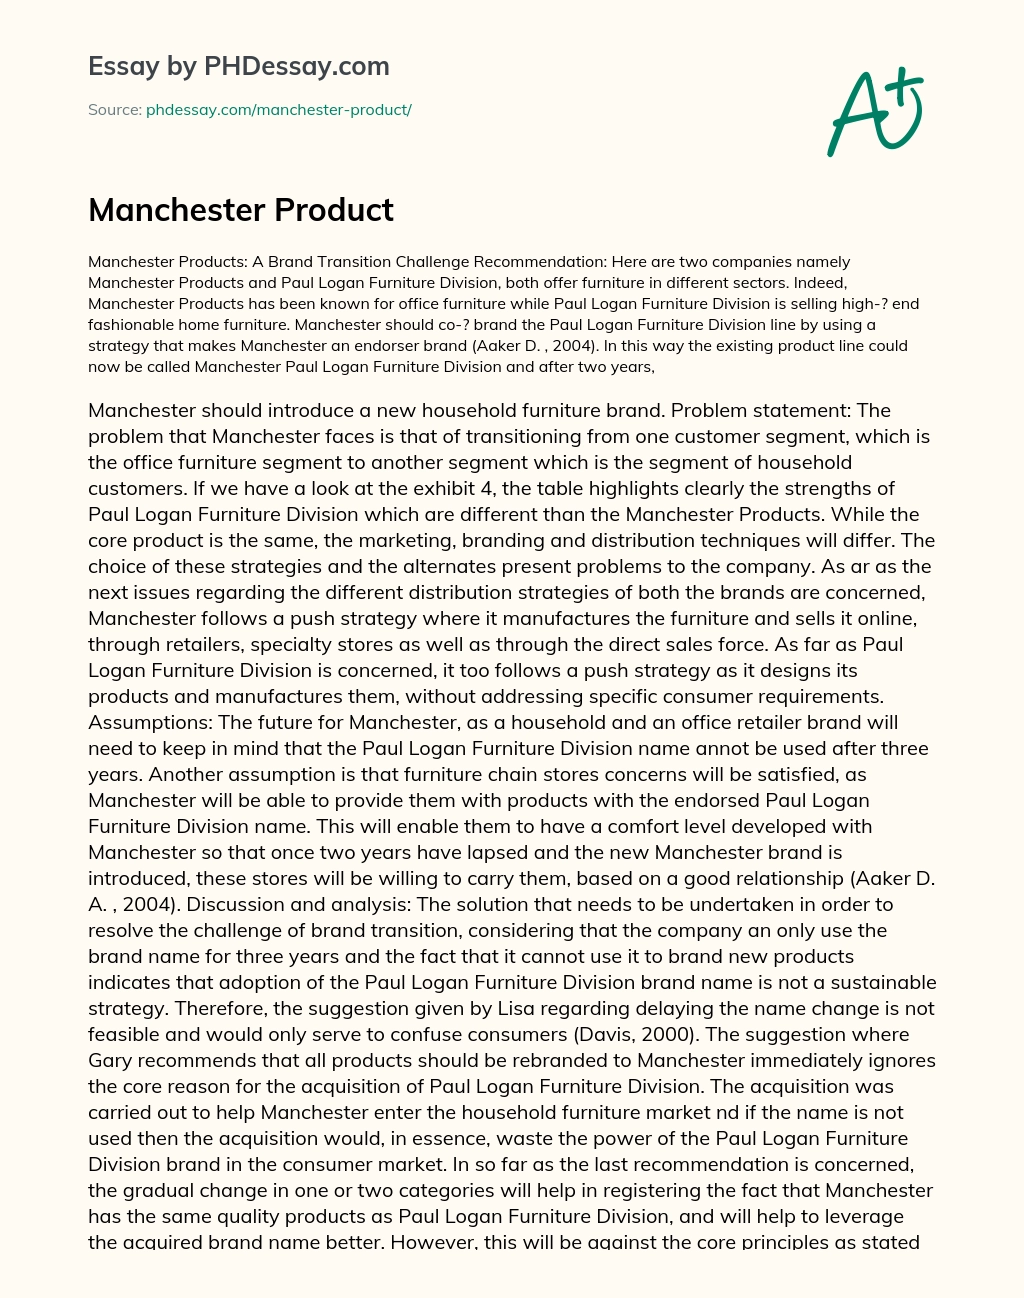 Manchester Product essay